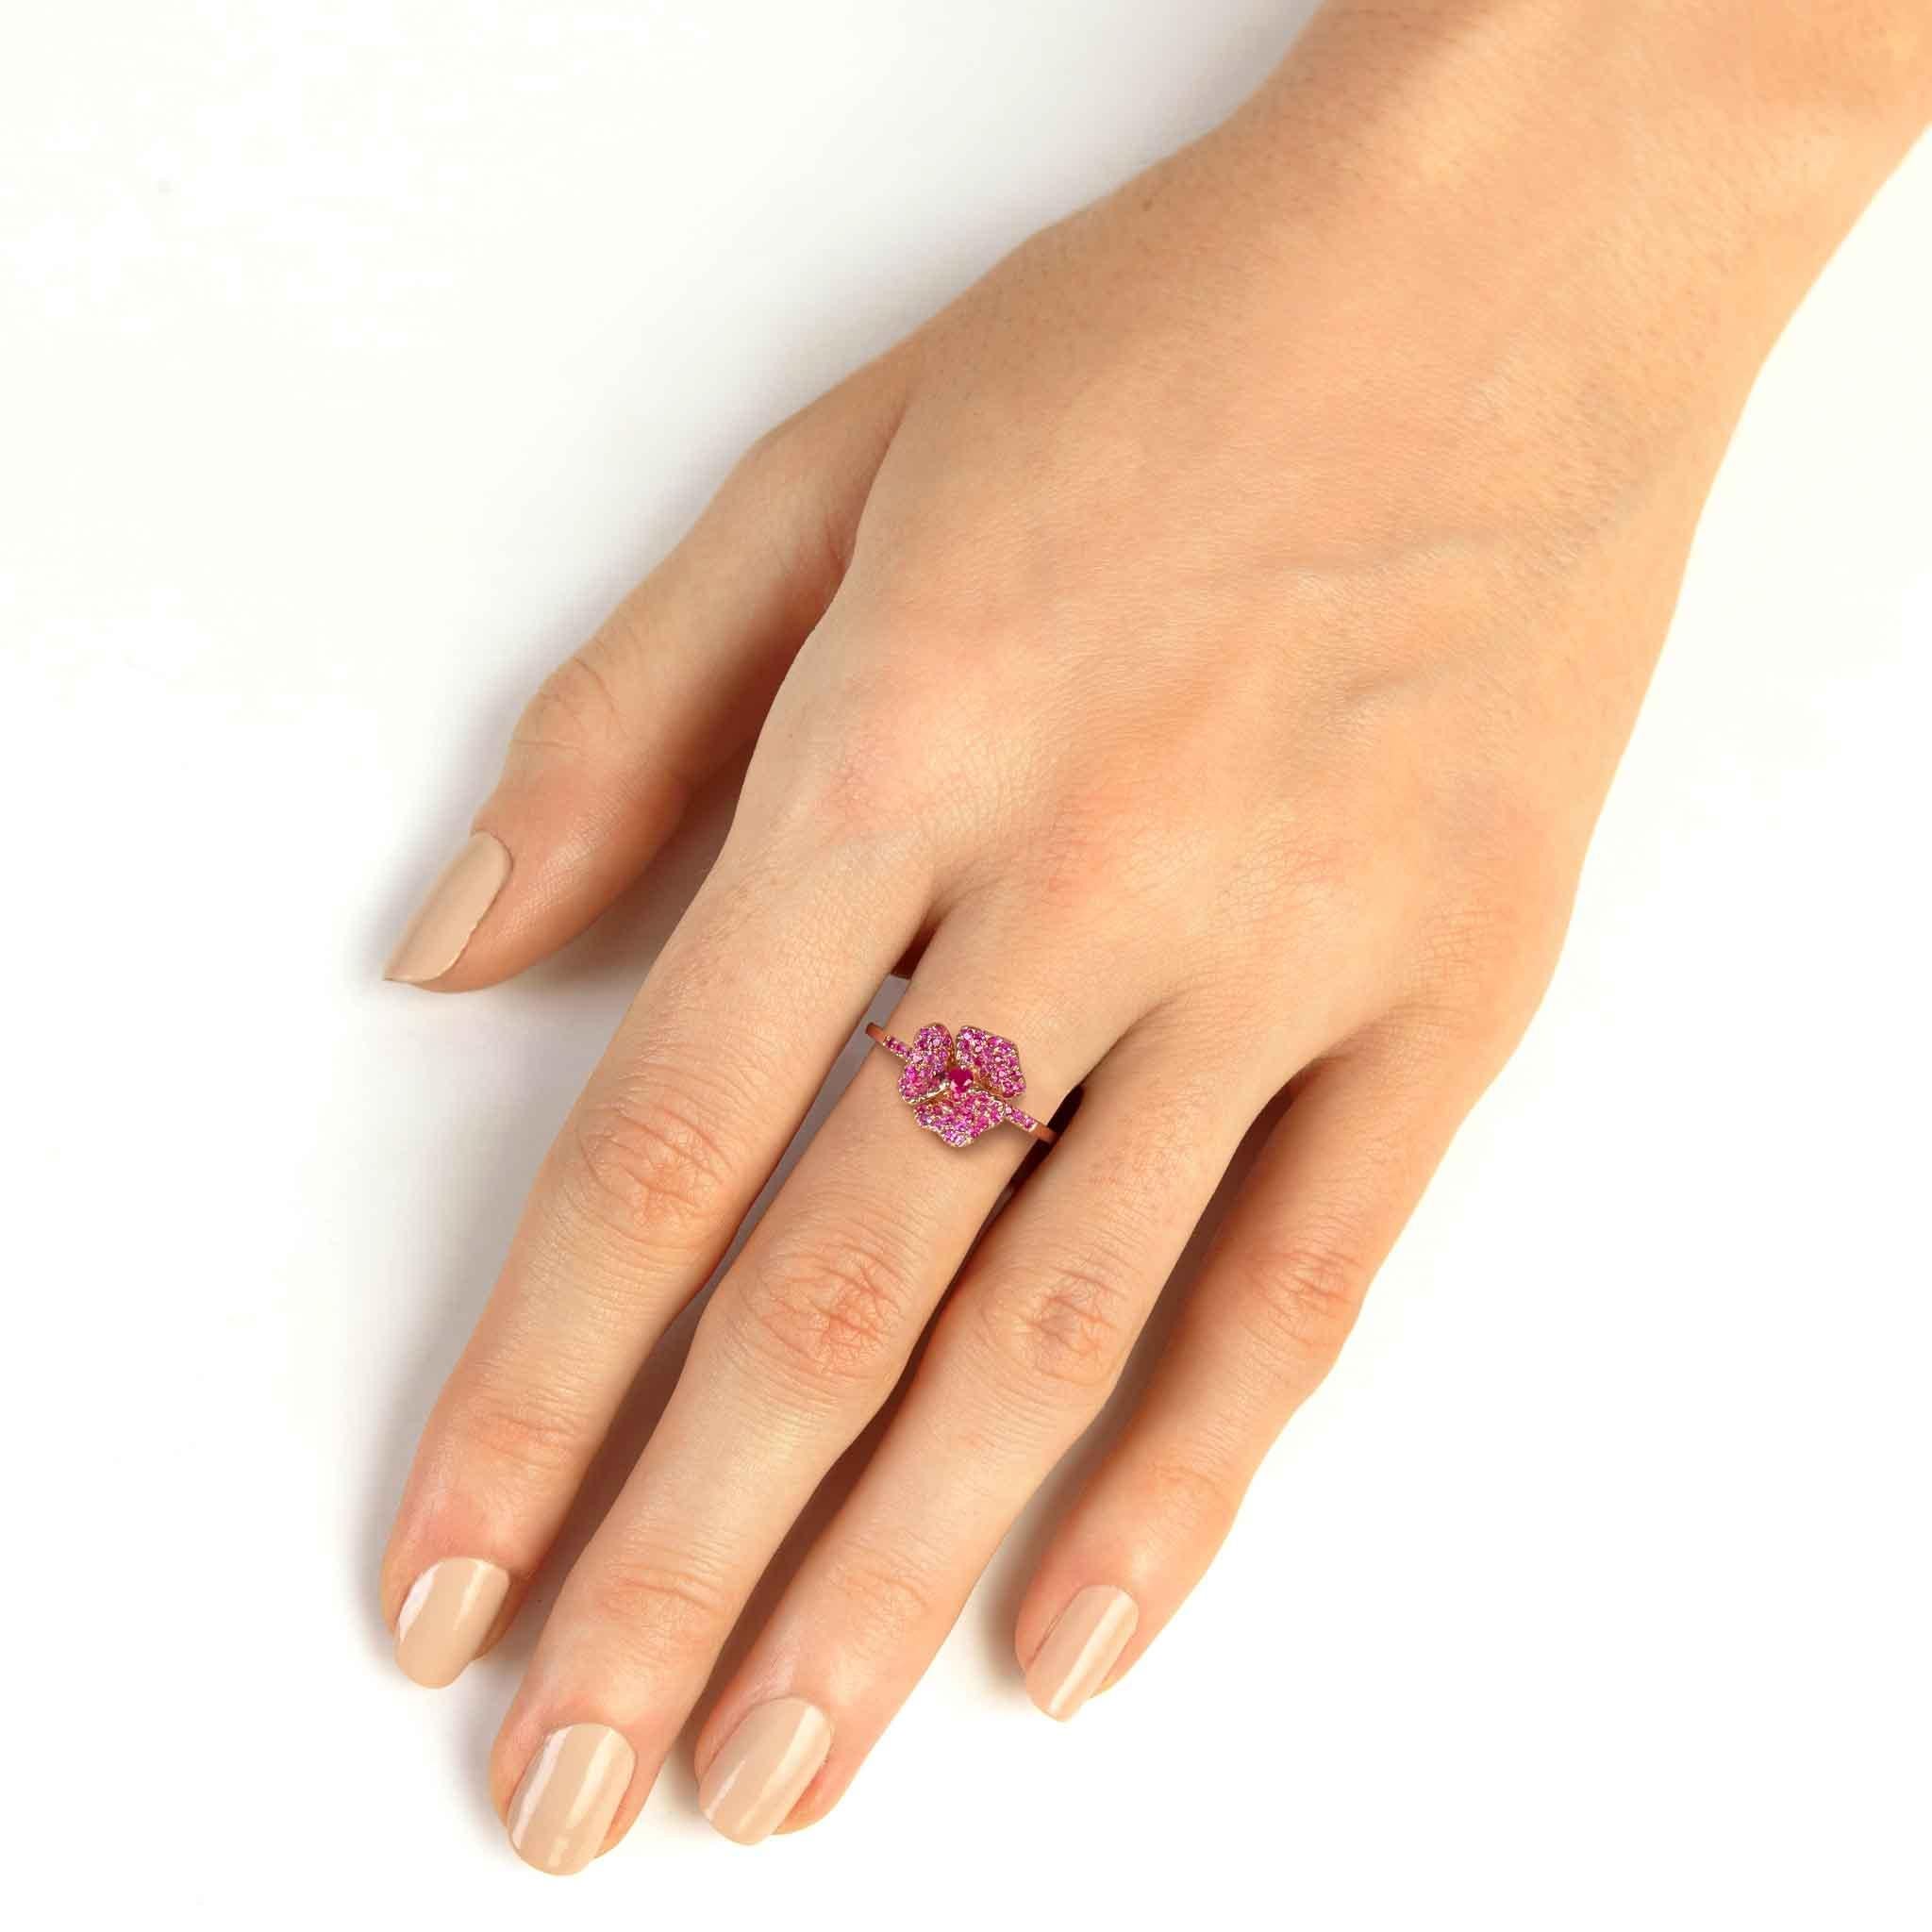 Crafted in 18K pink gold, this elegant ring encrusted with Pink Sapphires.

Part of our bloom collection, this pansy flower-inspired piece was designed to remind you of the infinite possibilities within. 

18K Pink Gold
Pink Sapphires Carat Weight: